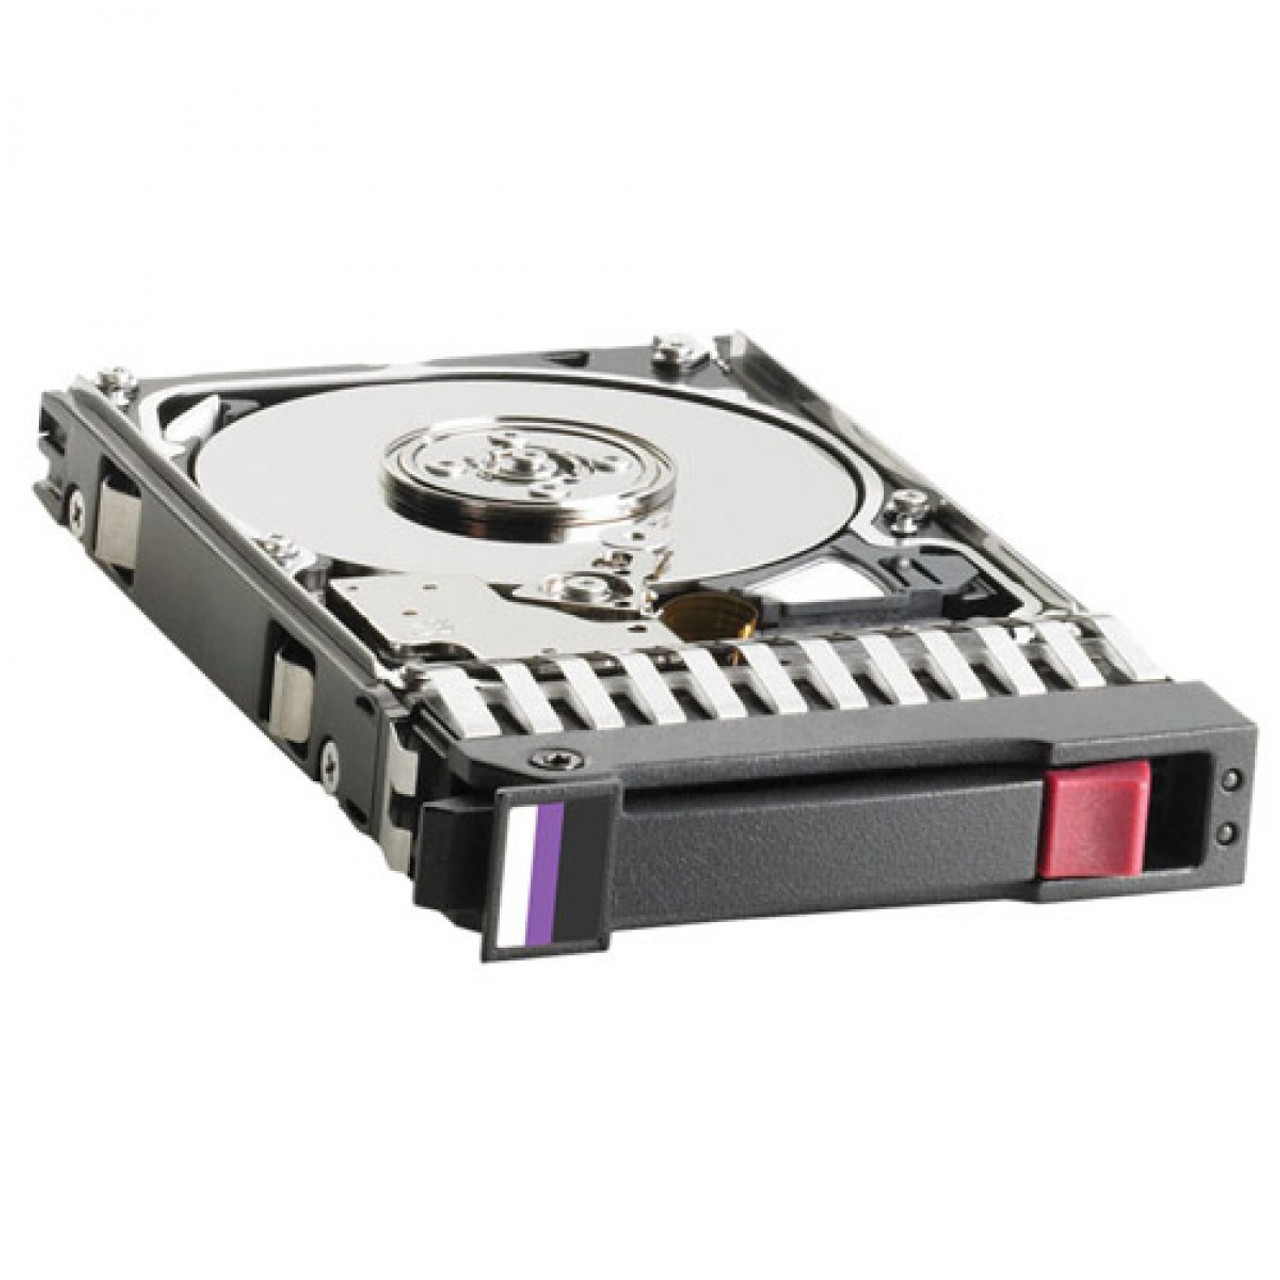 A7381442 - Dell 1TB 7200RPM Near Line SAS 3GB/s 3.5-inch Hot-pluggable Internal Hard Drive with Tray